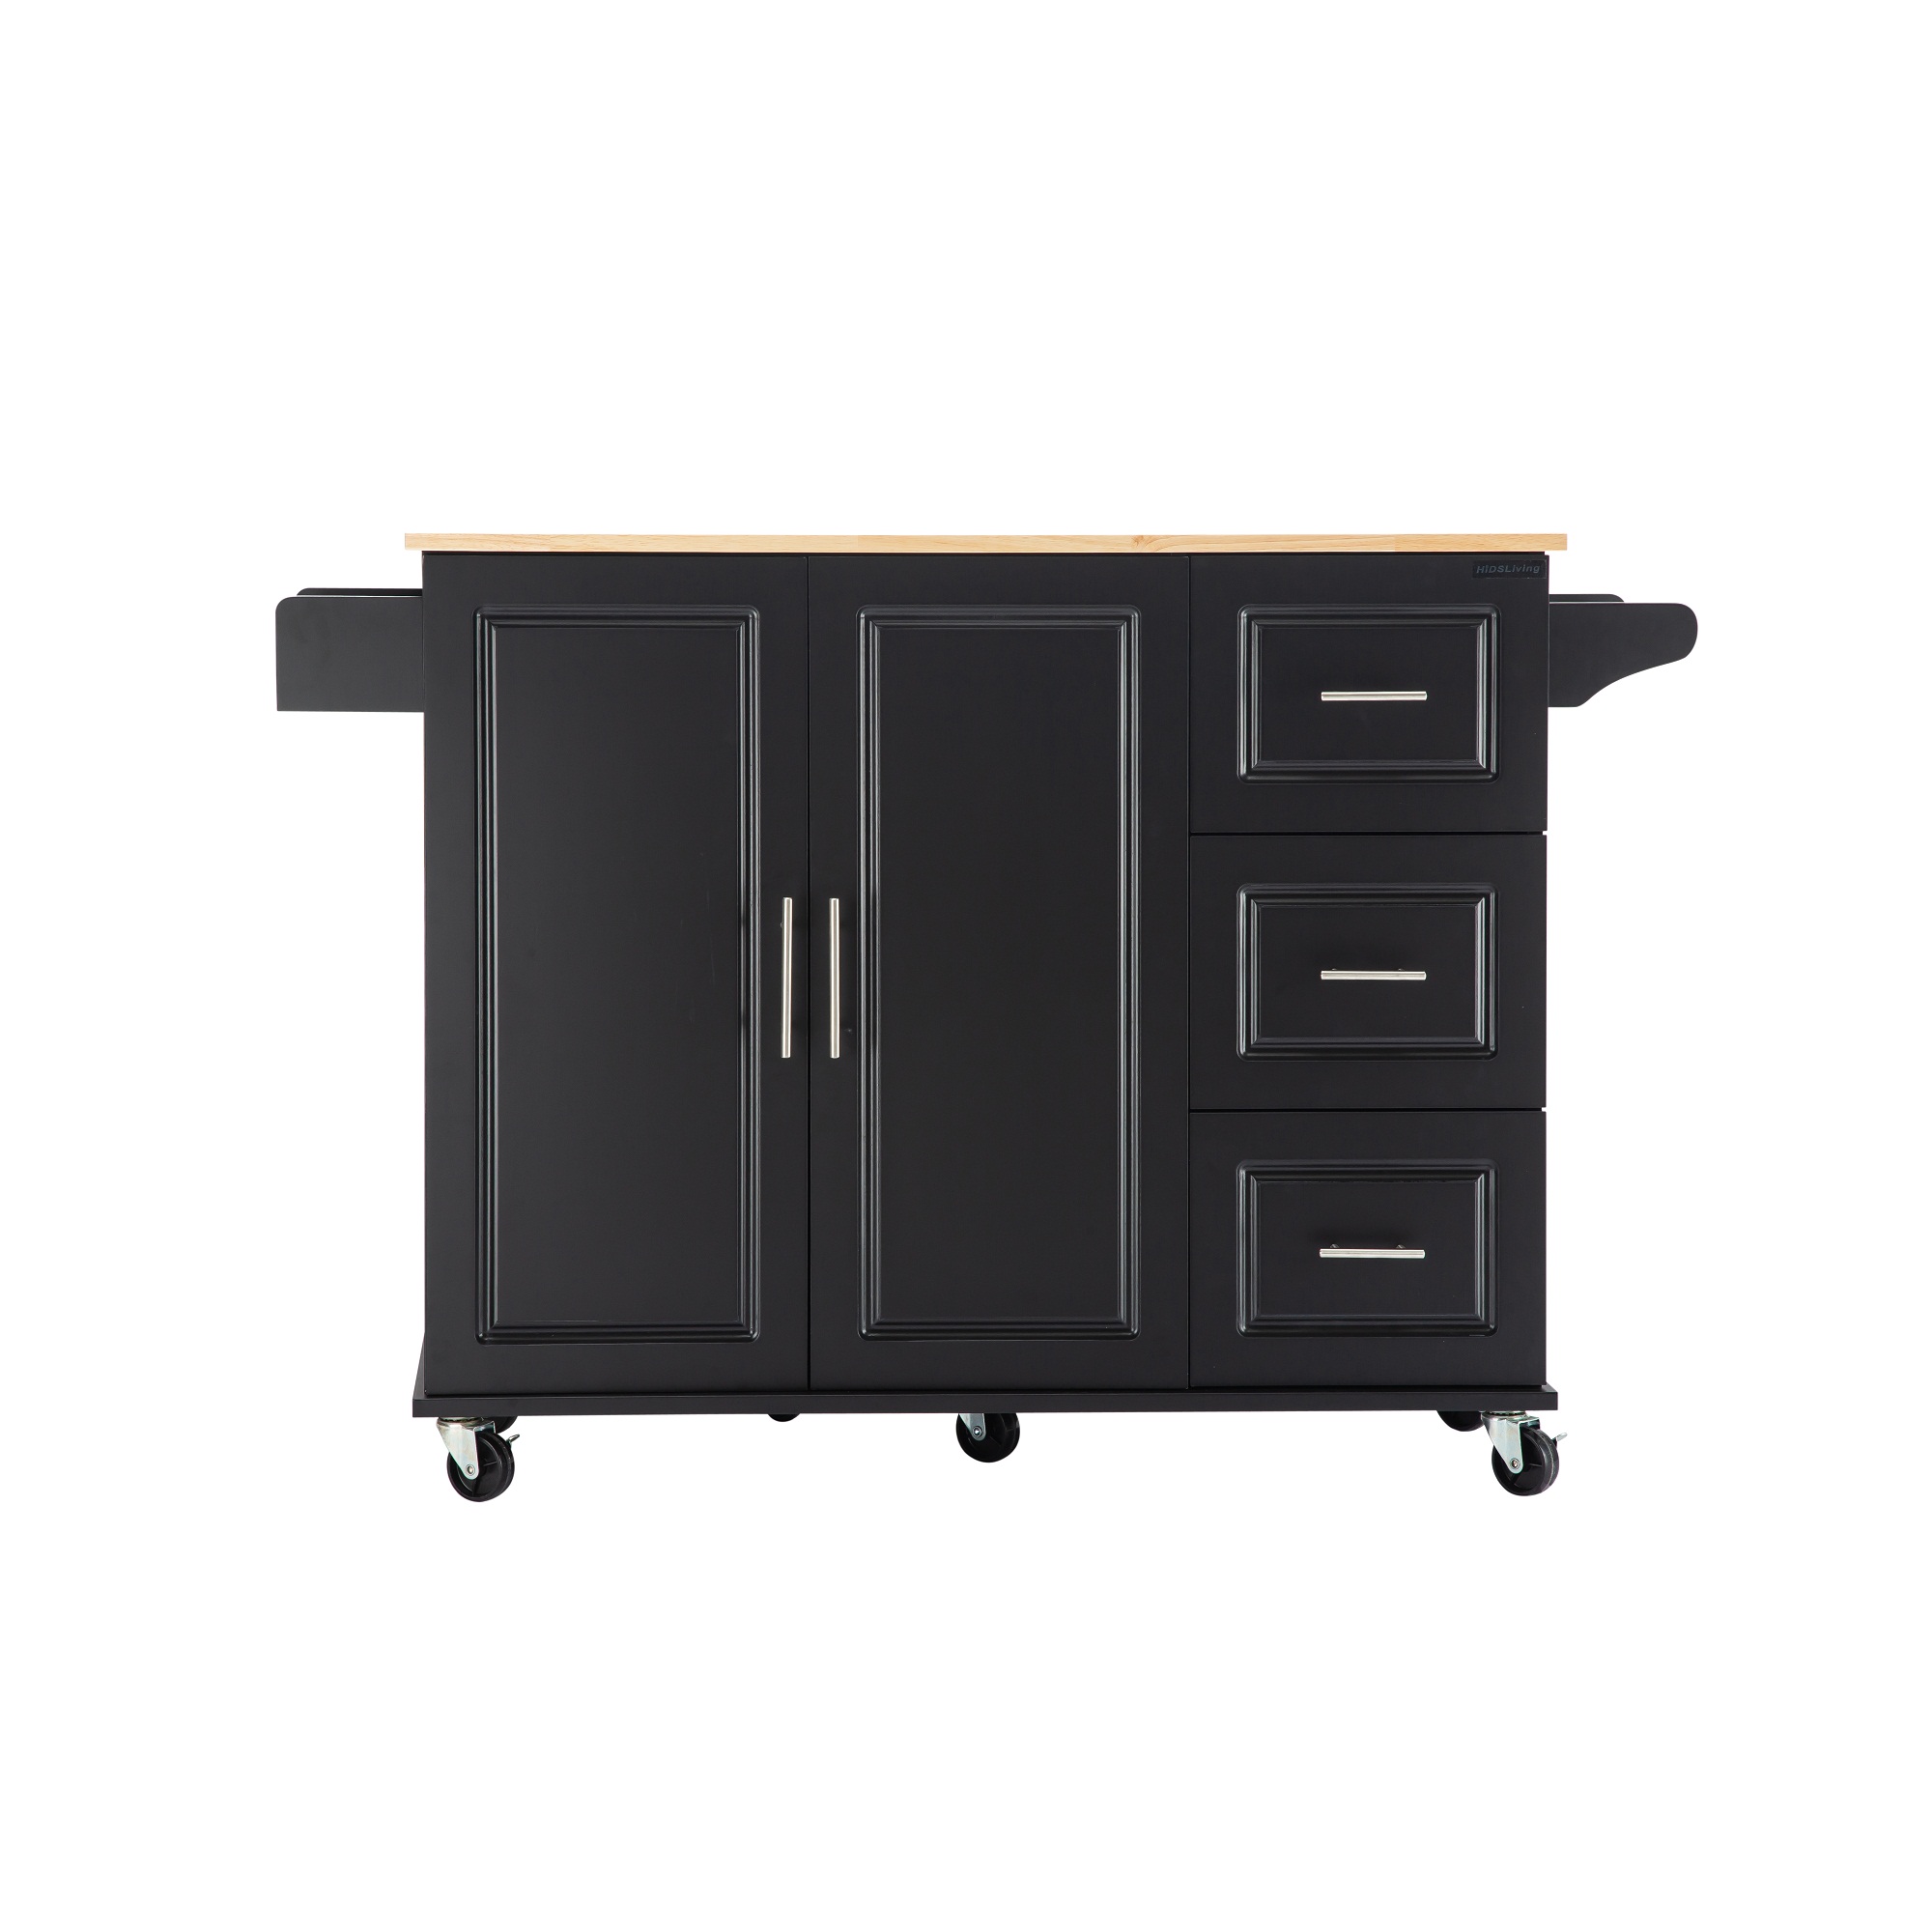 Kitchen Island  Kitchen Cart, \\nMobile Kitchen Island with Extensible Rubber Wood Table Top,\\nadjustable Shelf Inside Cabinet,\\n3 Big Drawers, with Spice Rack, Towel Rack, \\nBlack-Beech .-CASAINC